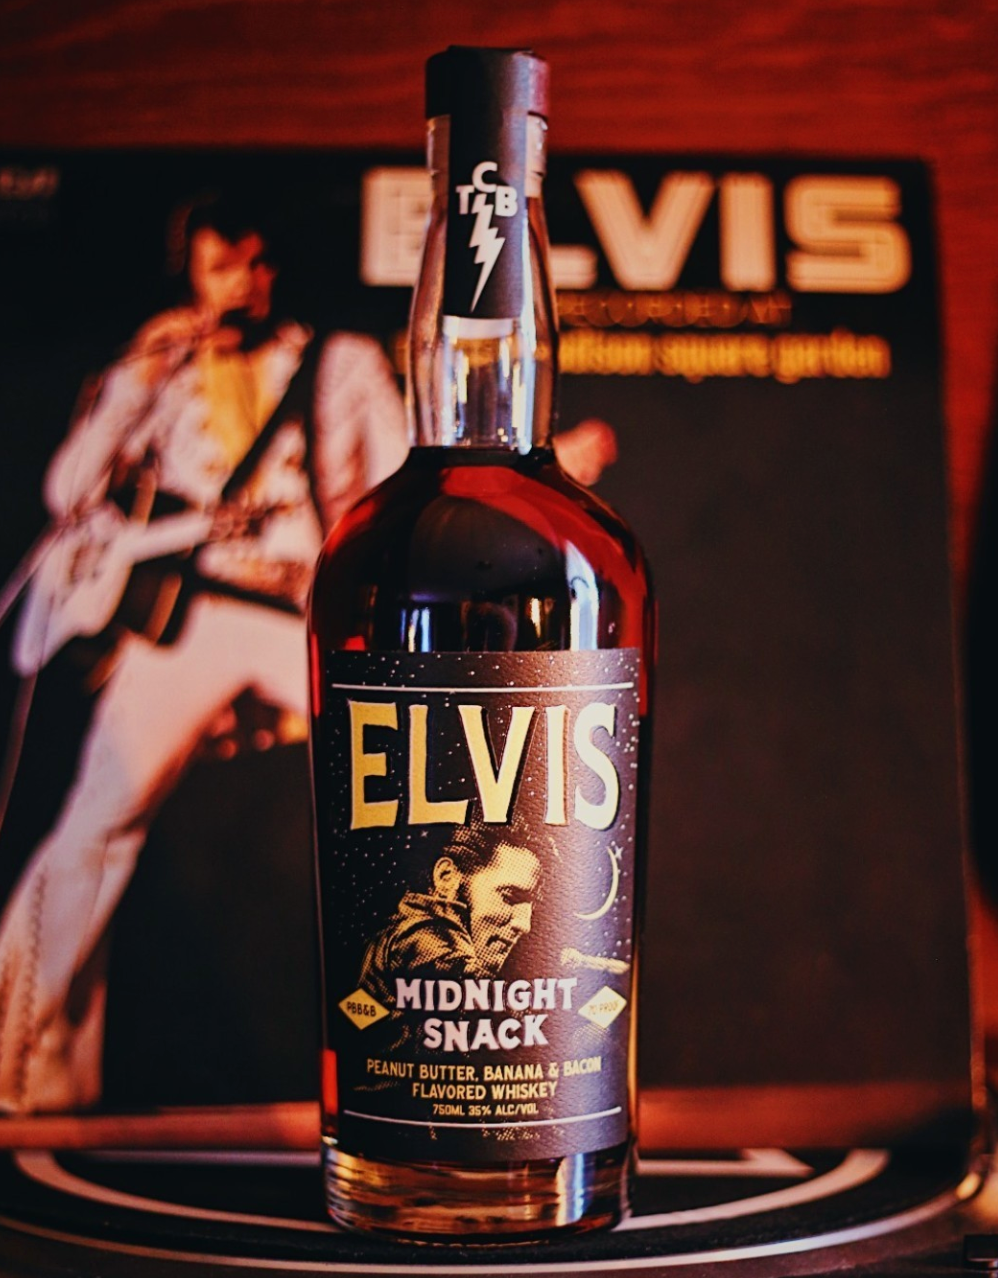 Elvis Midnight Snack Whiskey (Peanut Butter Banana and Bacon Flavored)